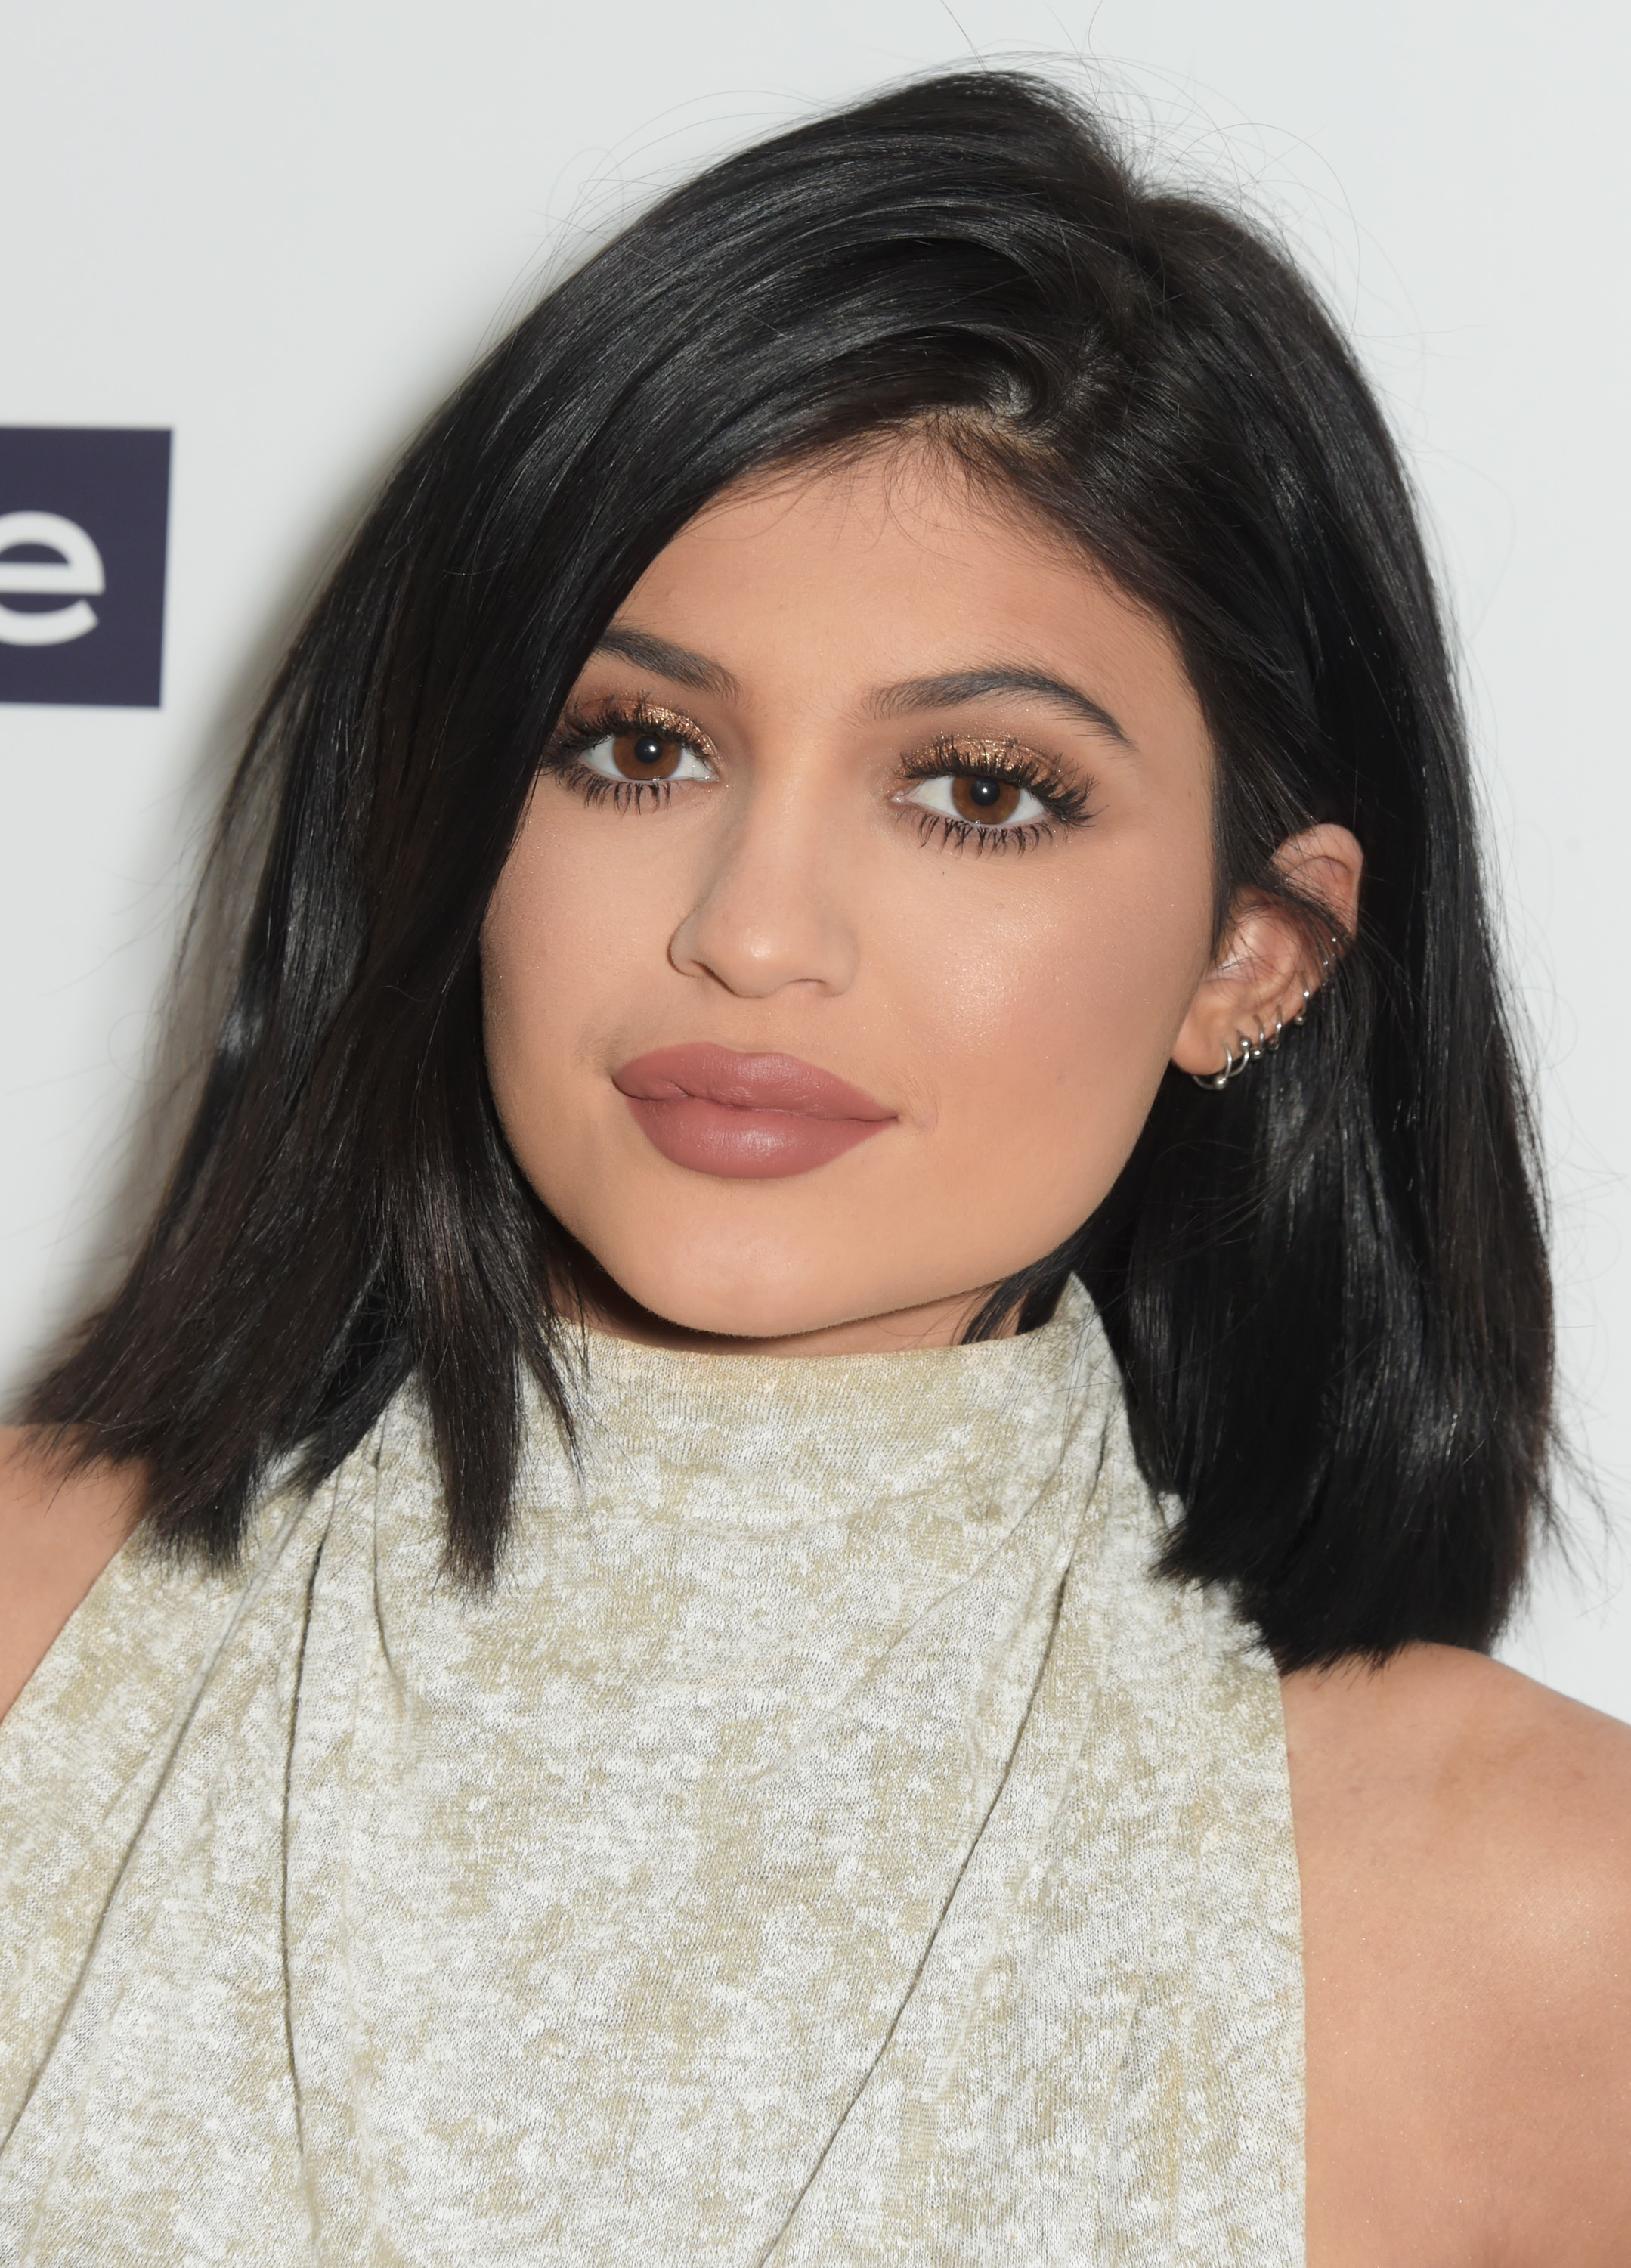 People Are Trying the "Kylie Jenner Challenge" for Bigger Lips — and